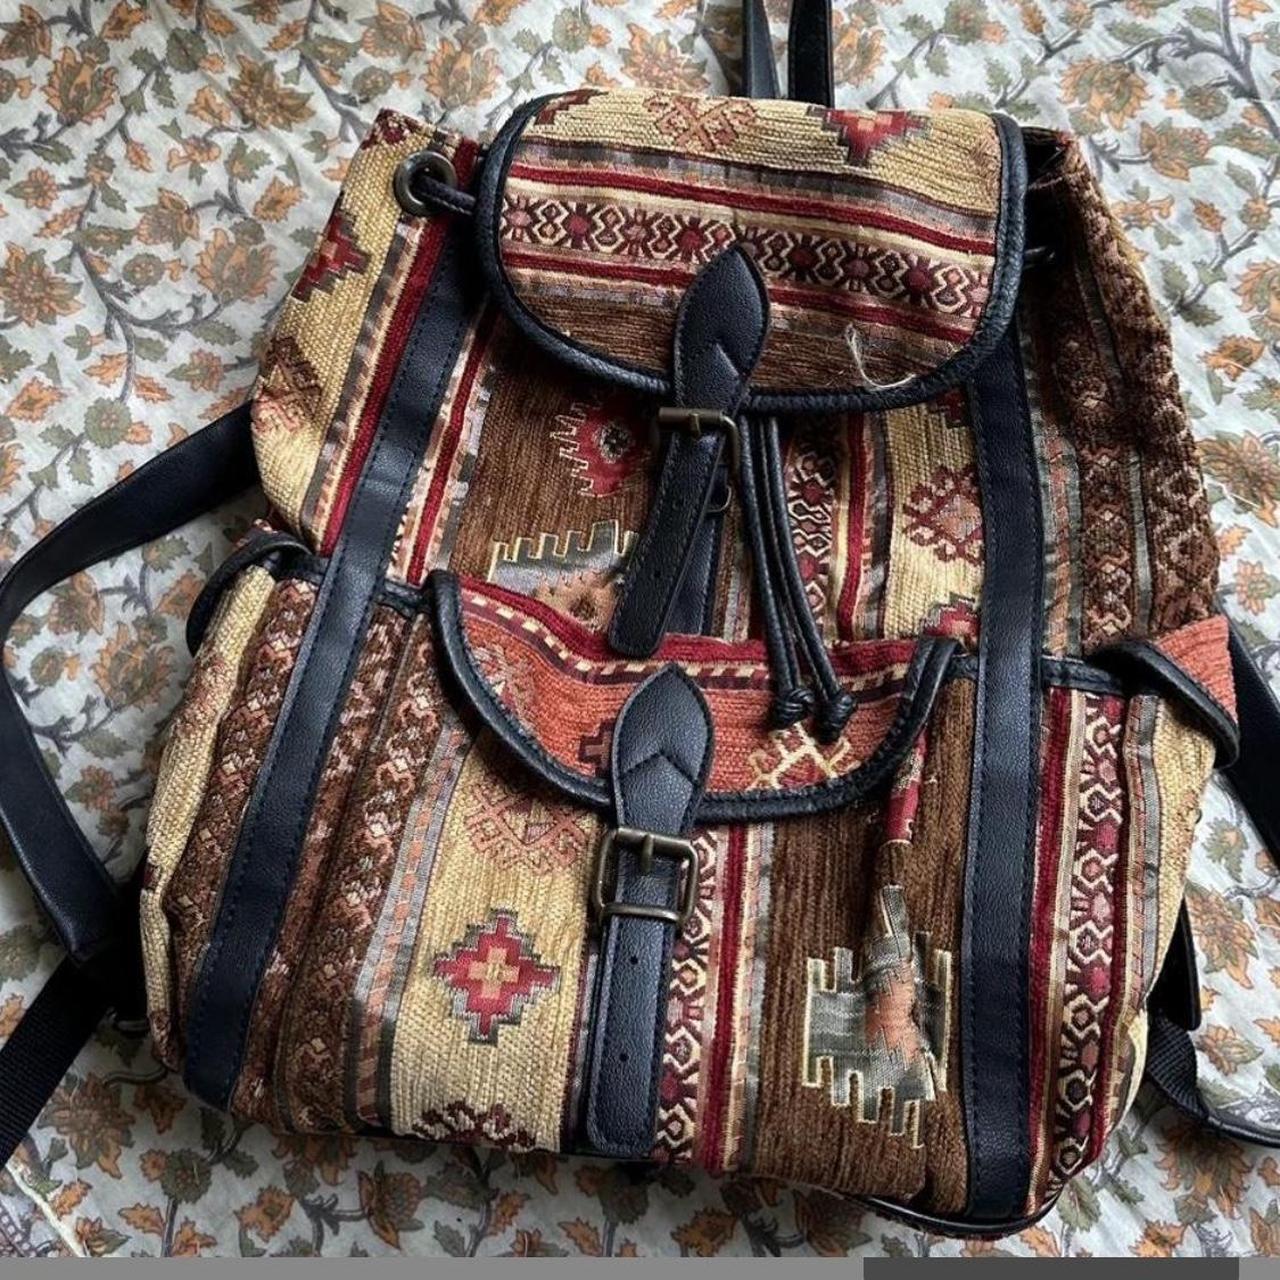 Vintage Boho Backpack - 3 Styles Available